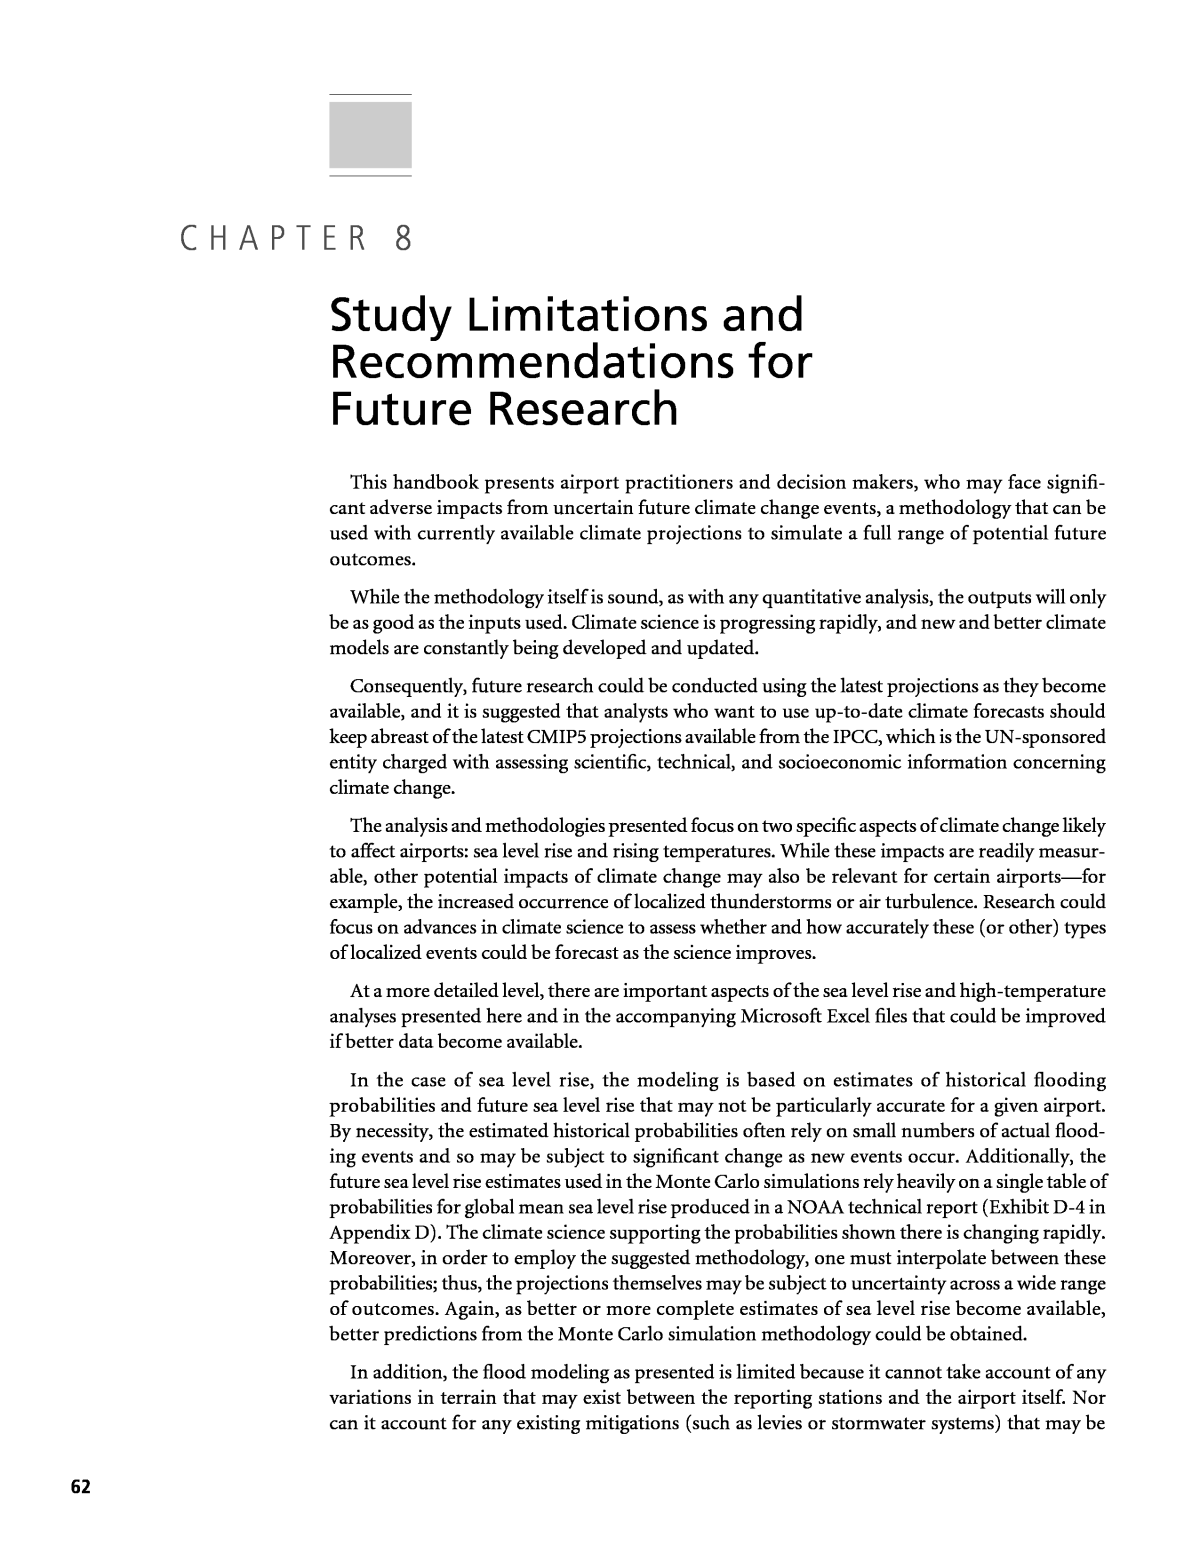 recommendations and limitations in research